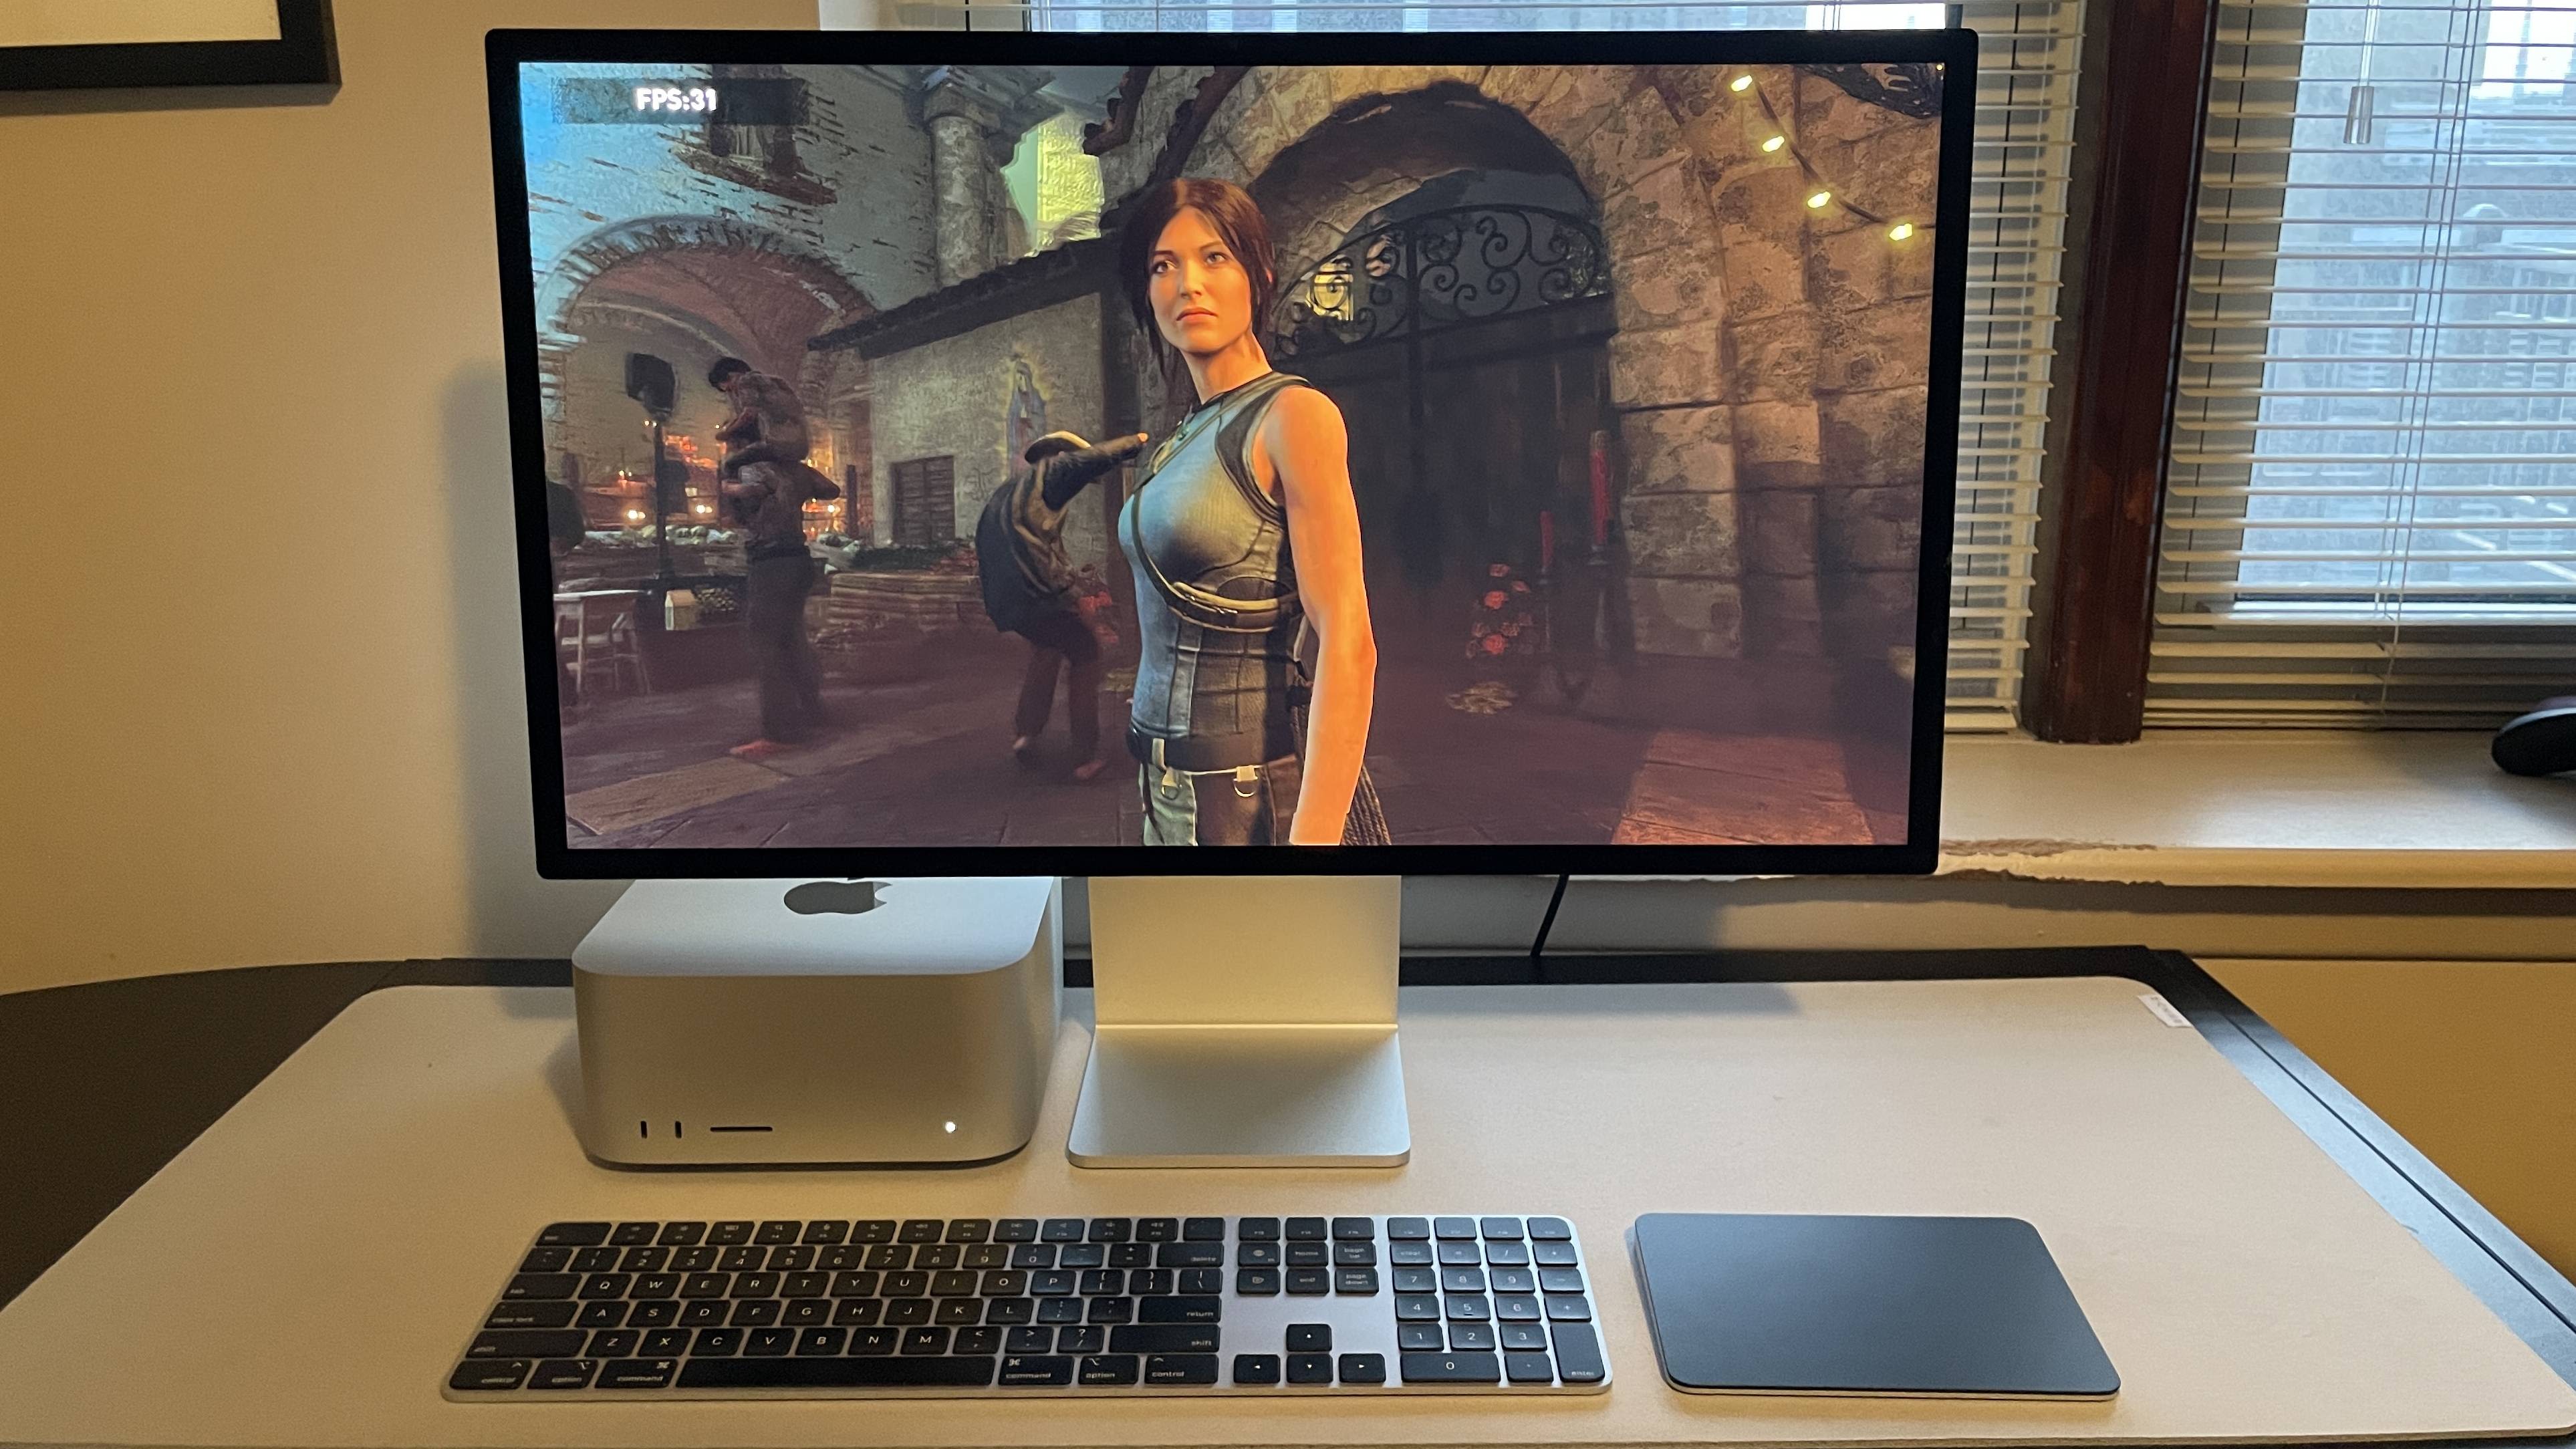 Apple Mac Studio review: Outrageous power in an ultra-compact box